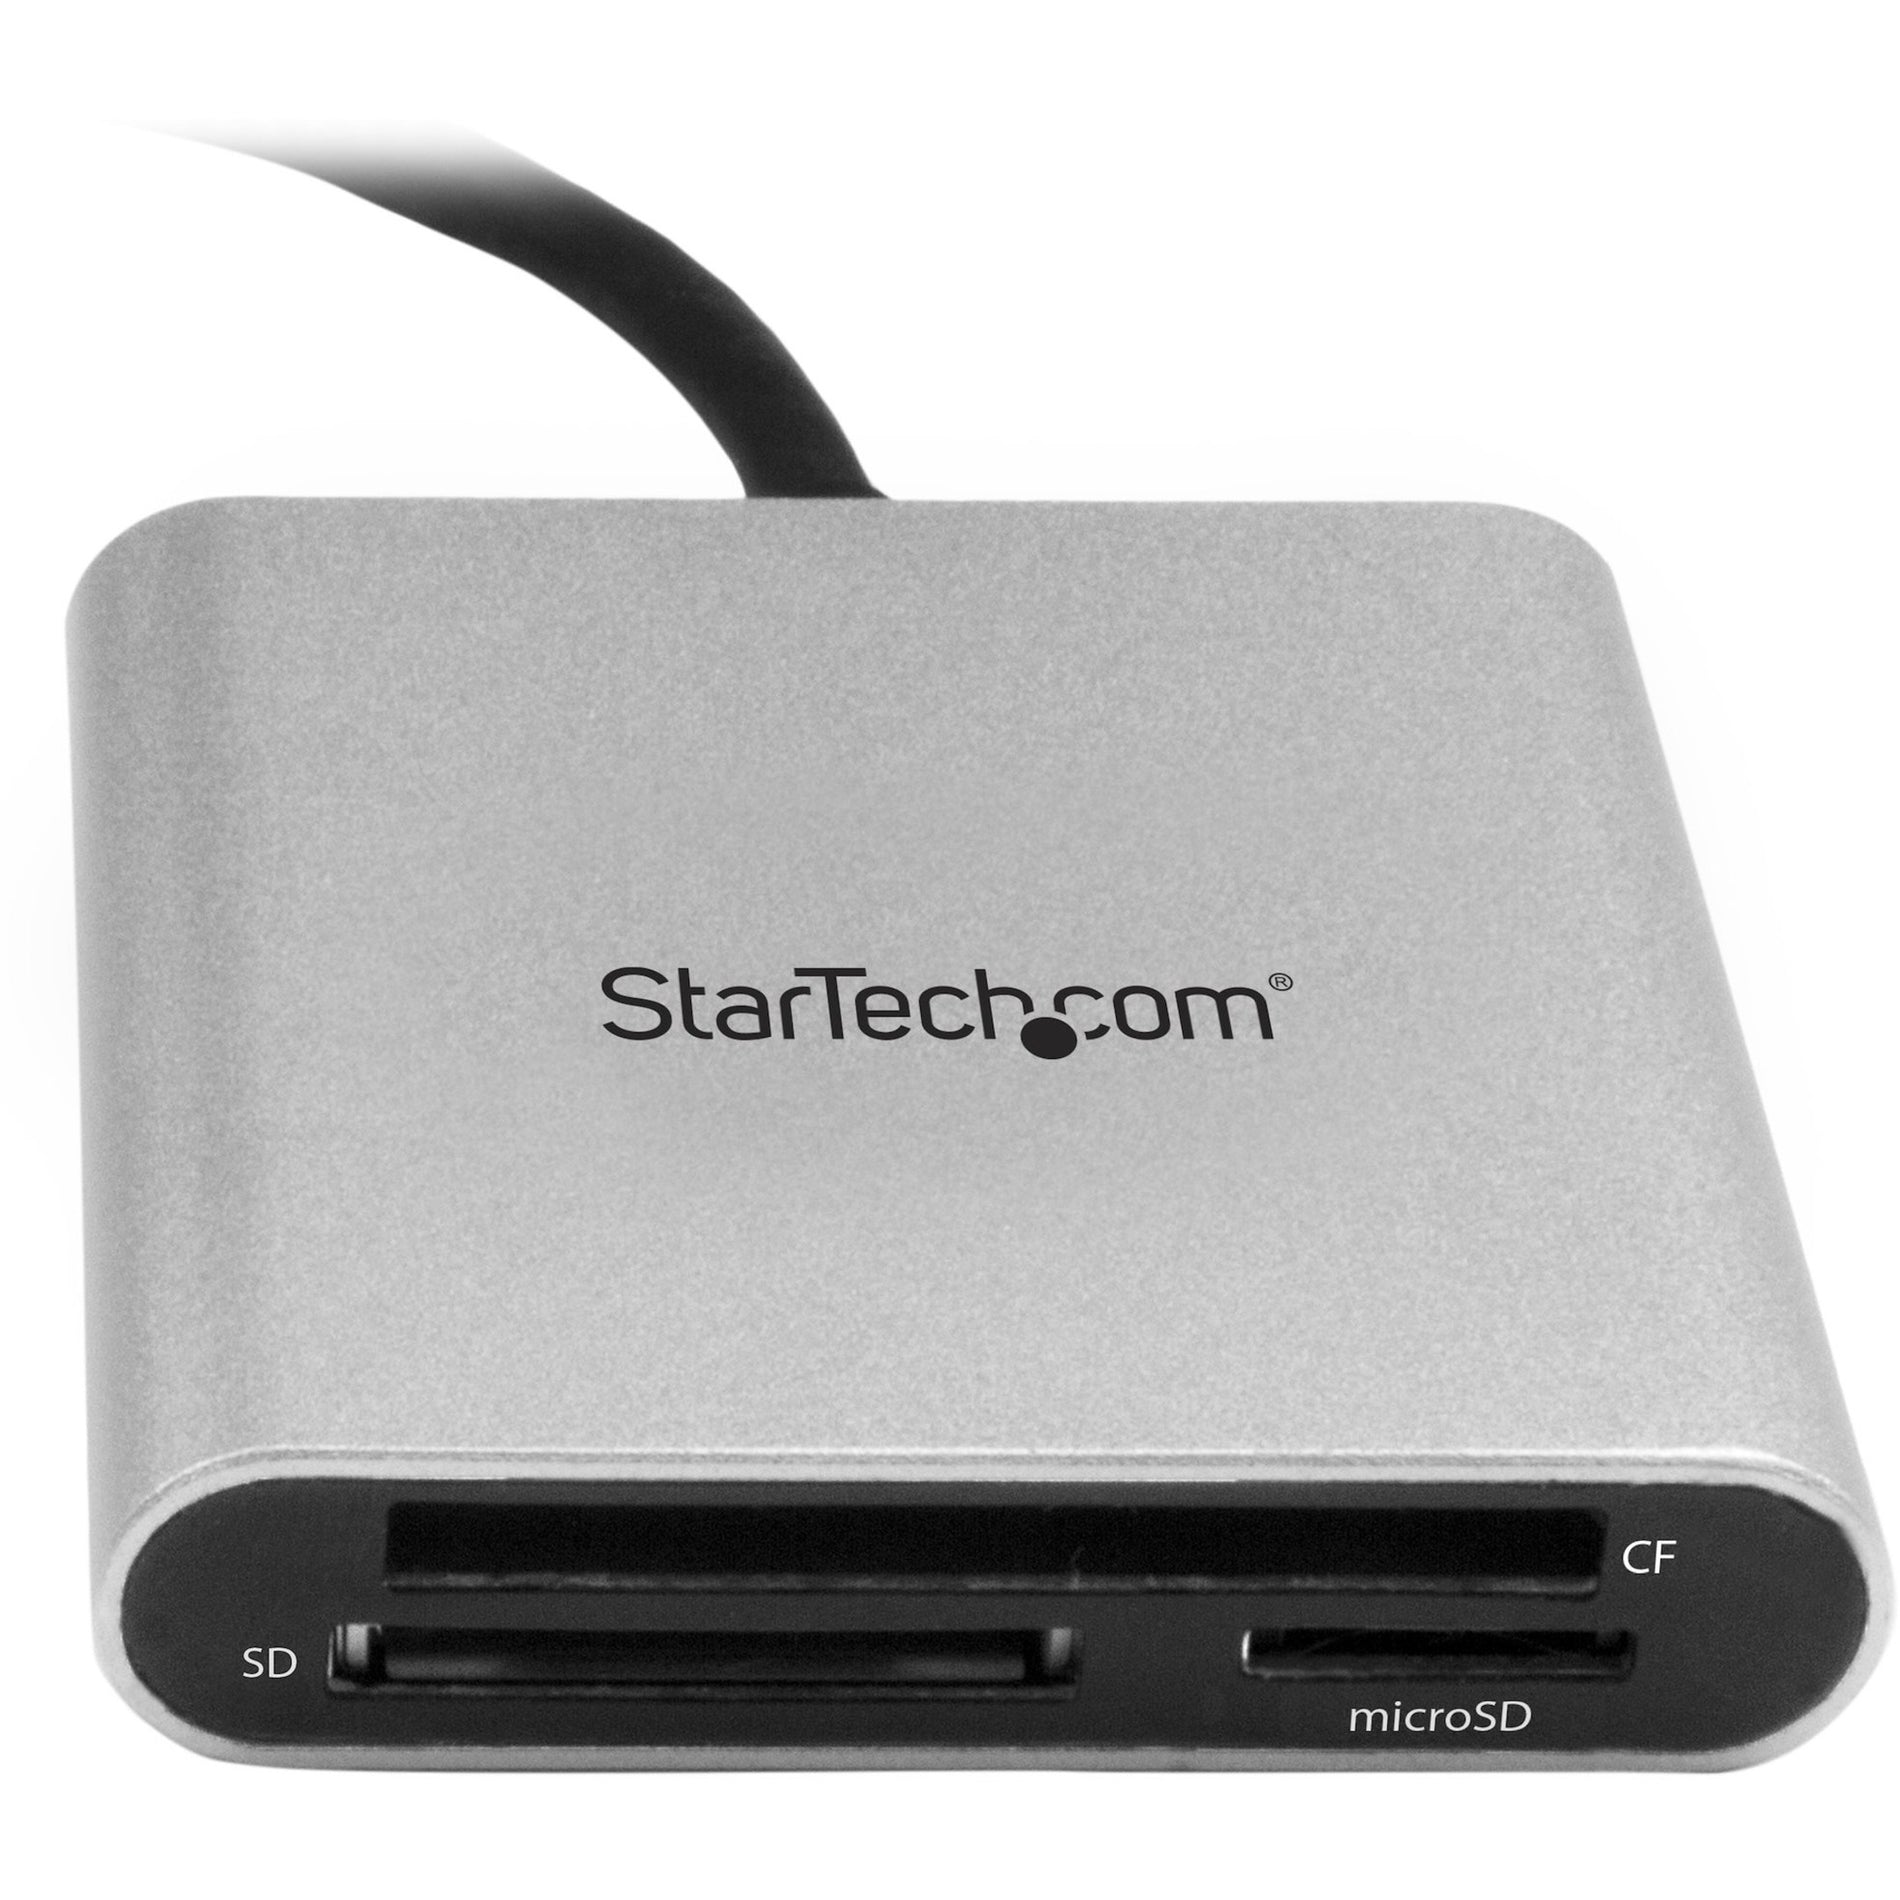 StarTech.com FCREADU3C Flash Reader, USB 3.0 Multi-Card Reader / Writer with USB-C - SD microSD and CompactFlash Card Reader w/ Integrated USB-C Cable